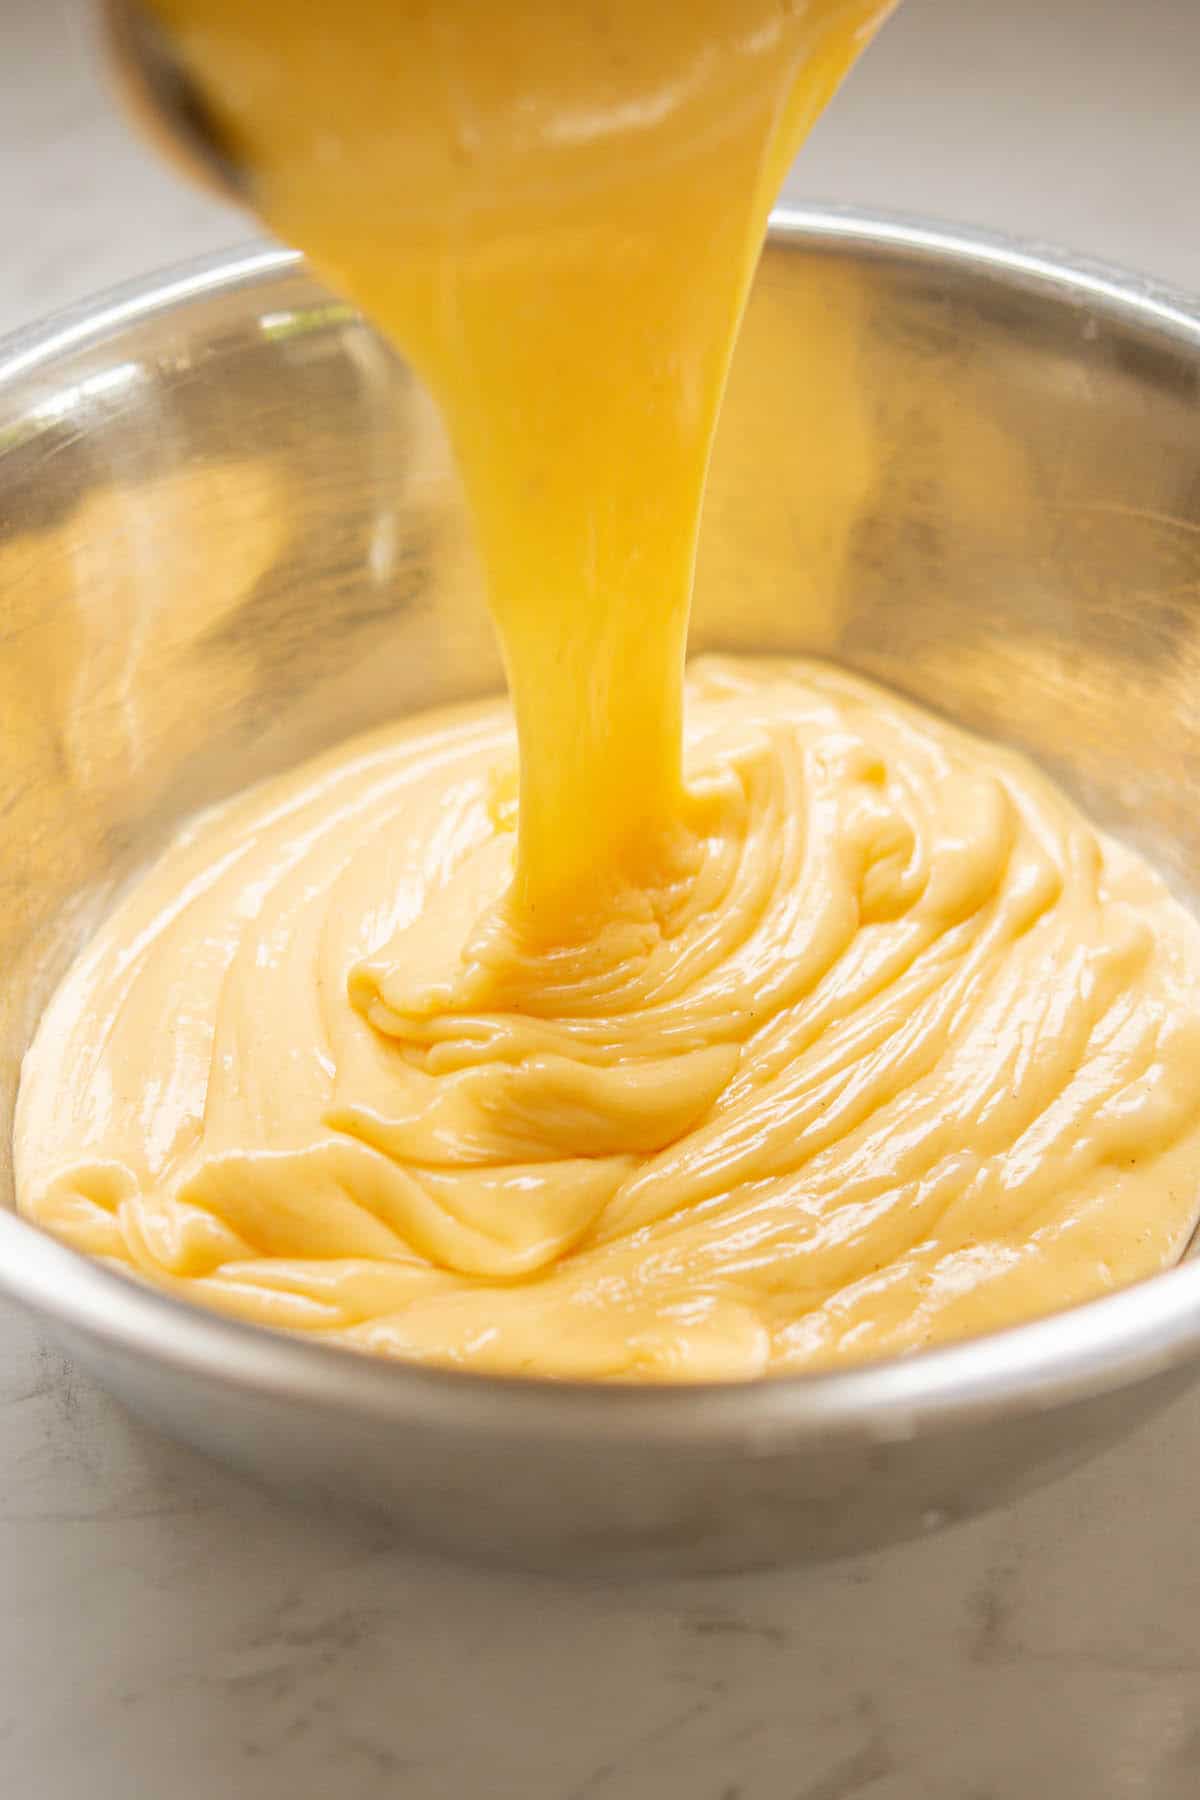 pastry cream being poured into a bowl.